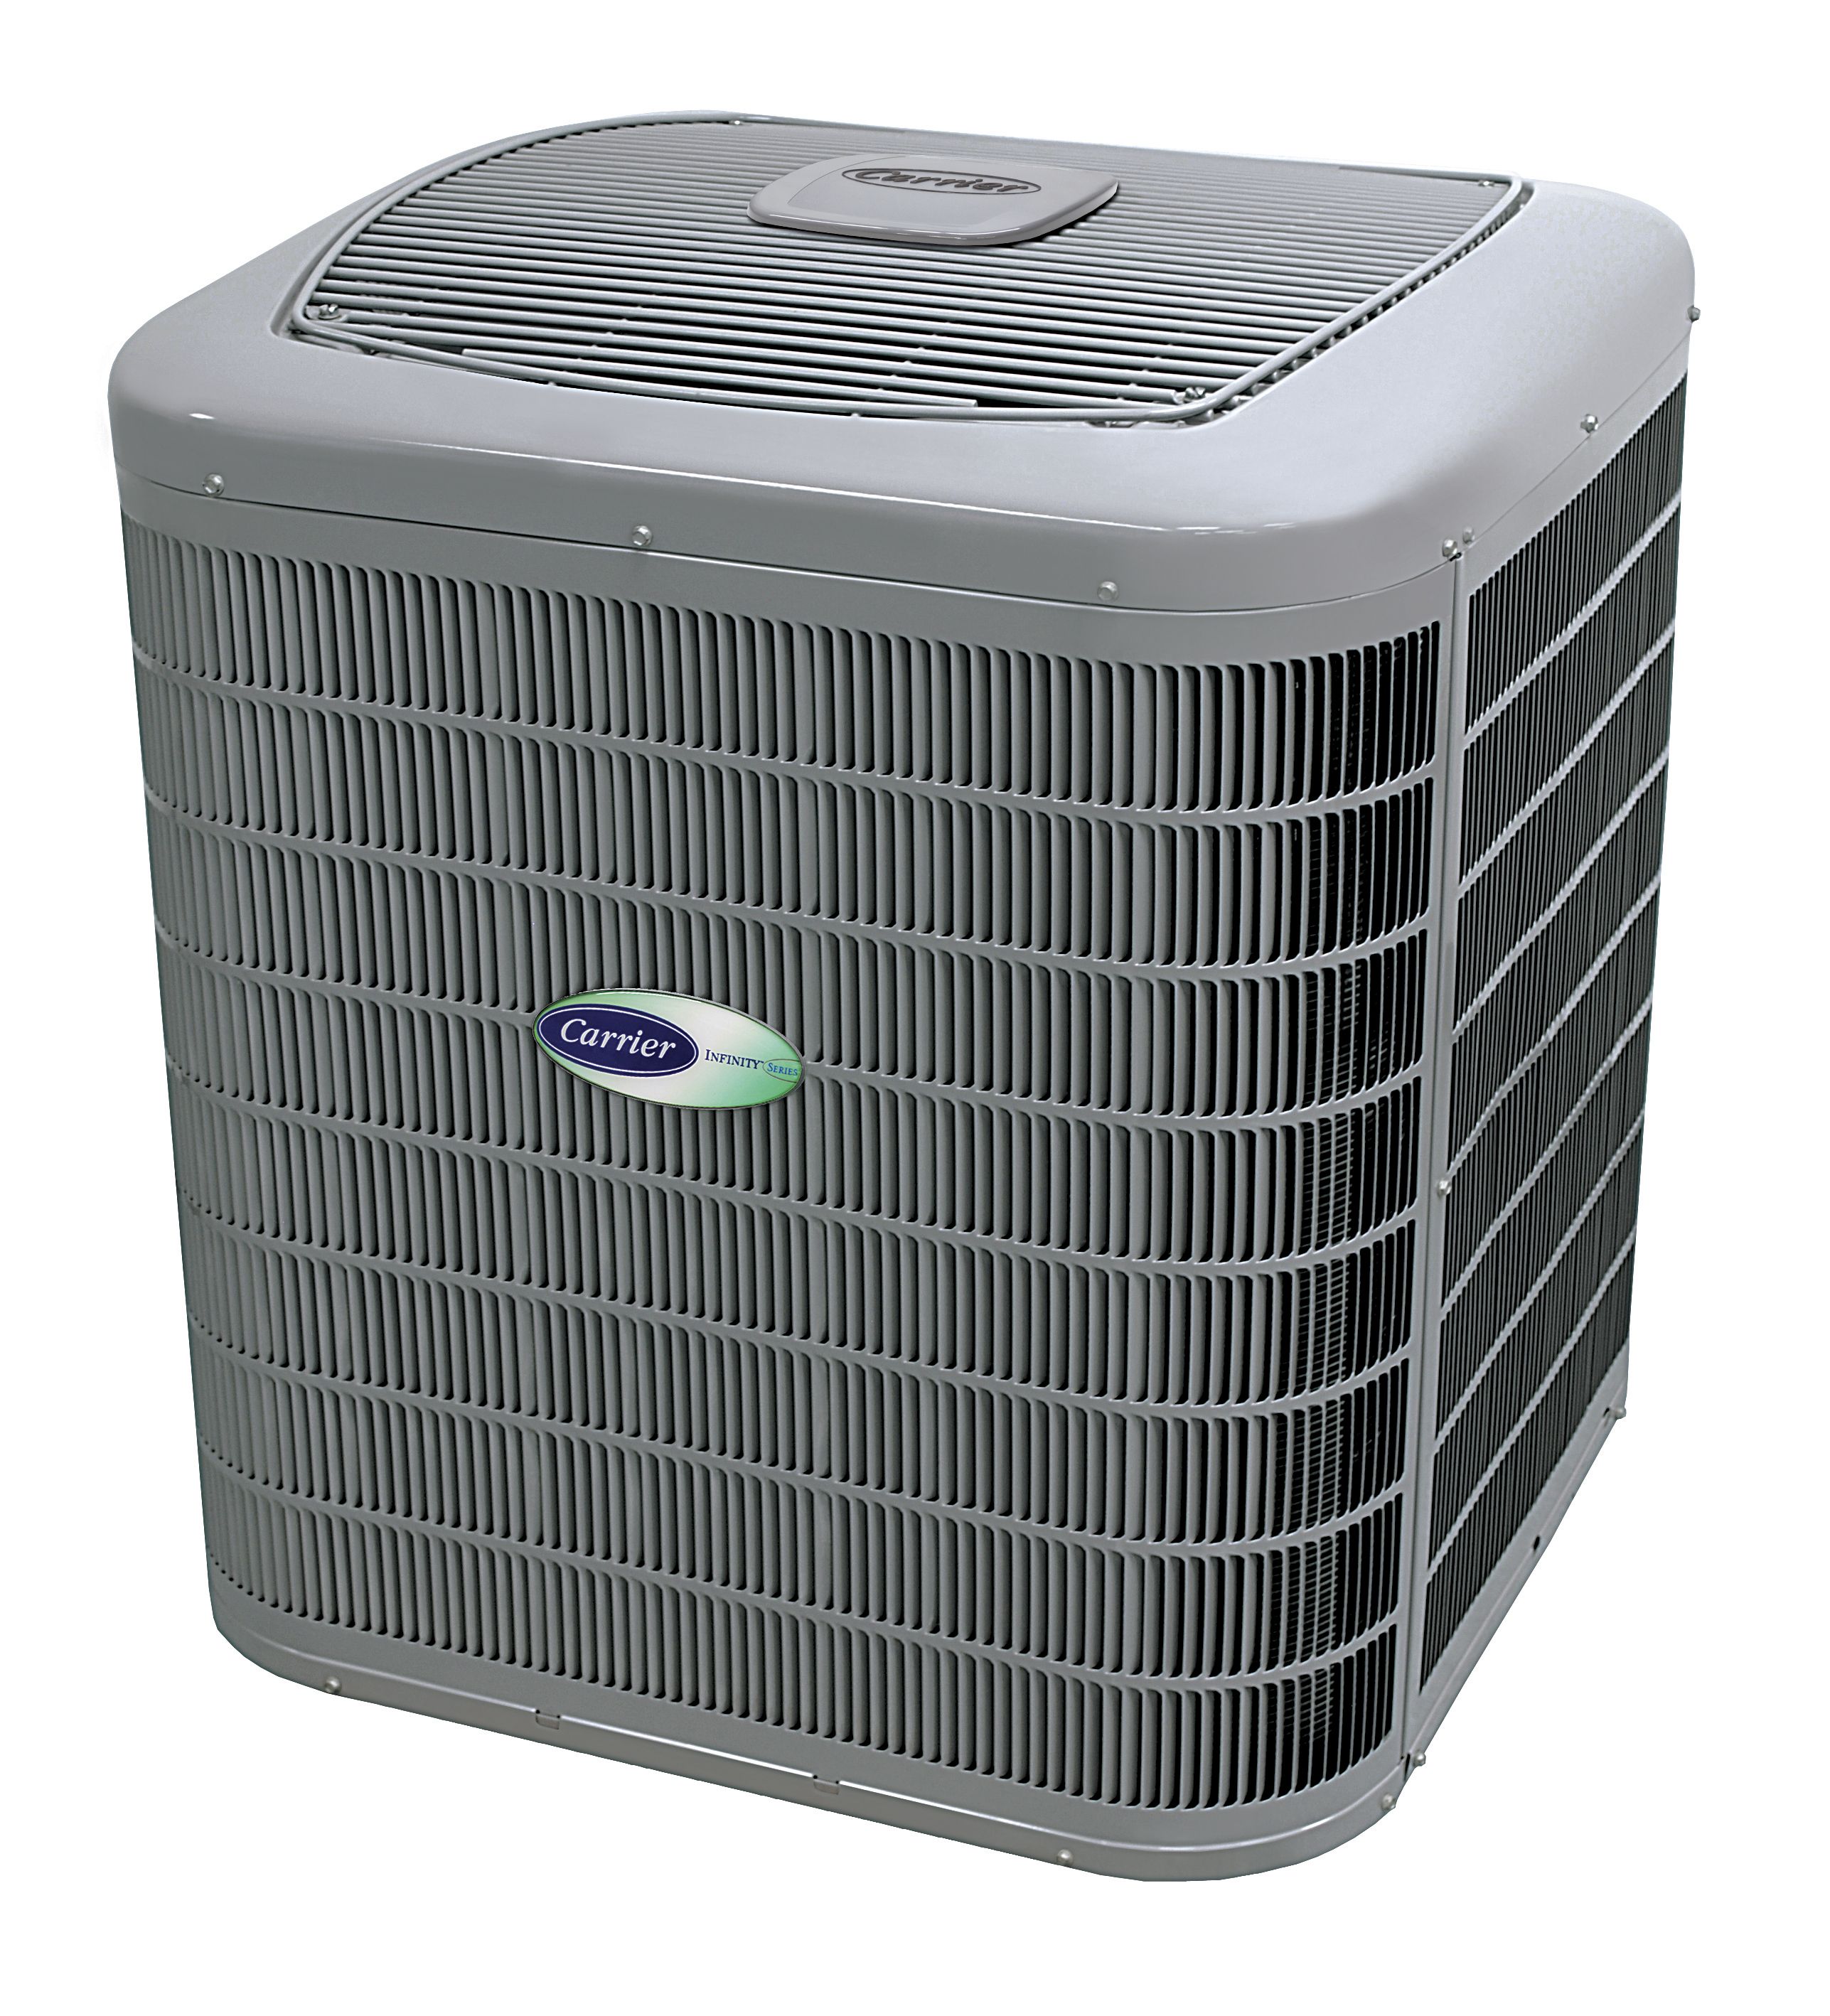 New Carrier Air Conditioner on white background